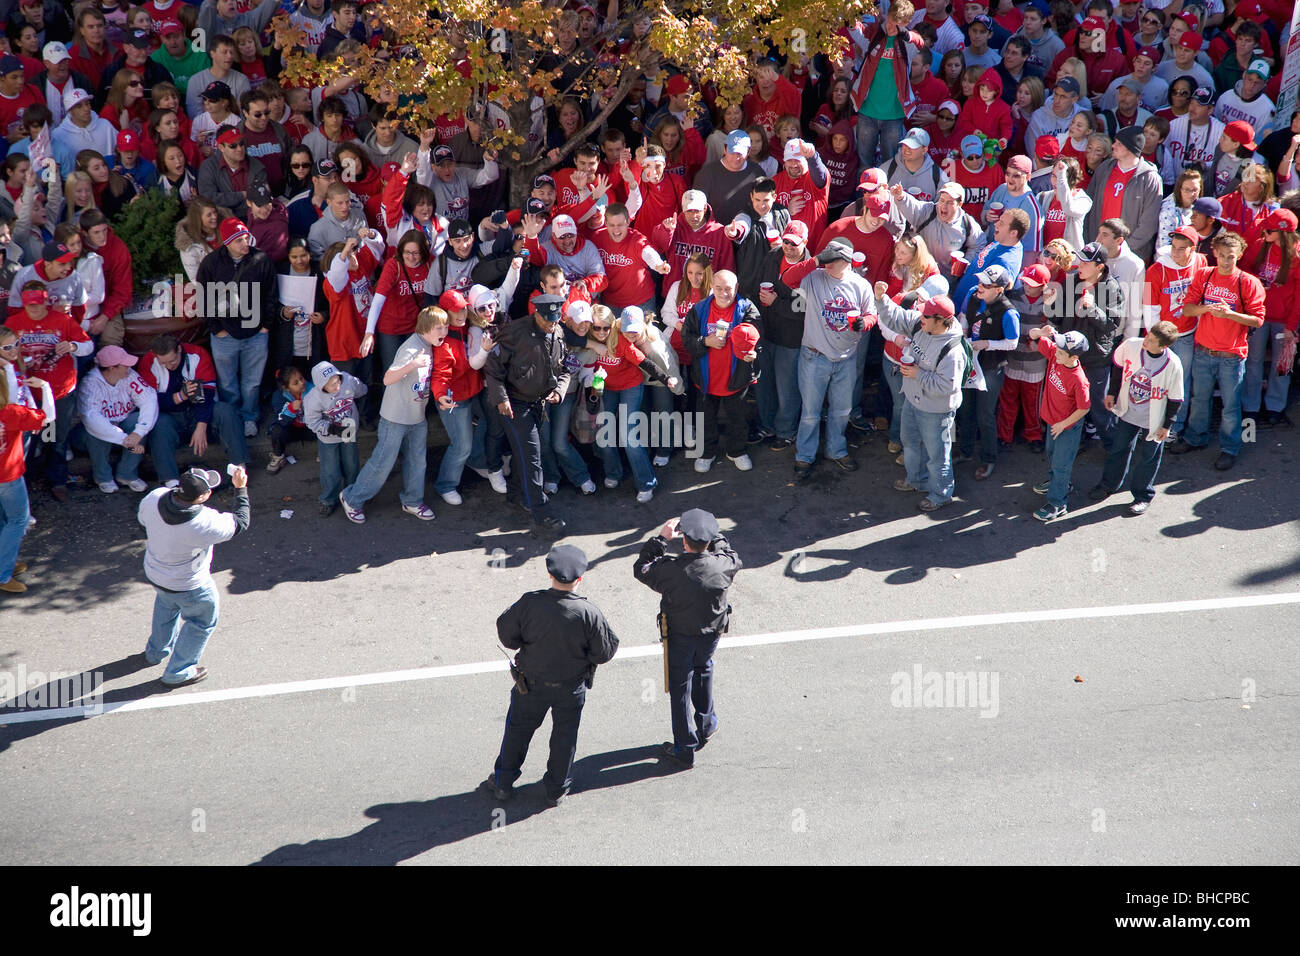 Police take picture of crowd of Philadelphia Phillies fans celebrating Phillies World Series victory October 31, 2008 parade Stock Photo